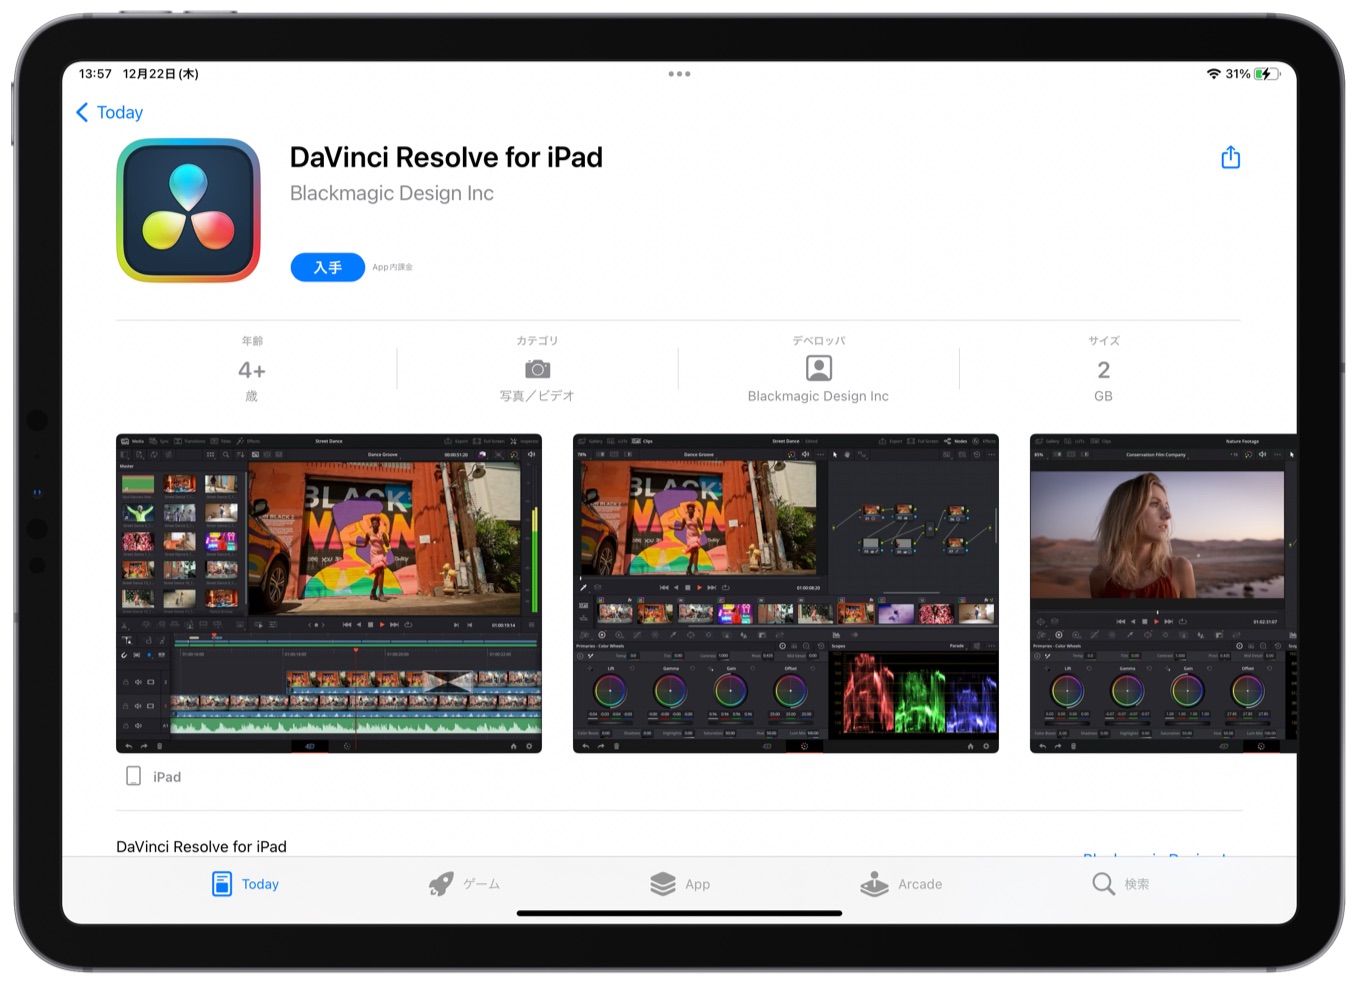 DaVinci Resolve for iPad now available